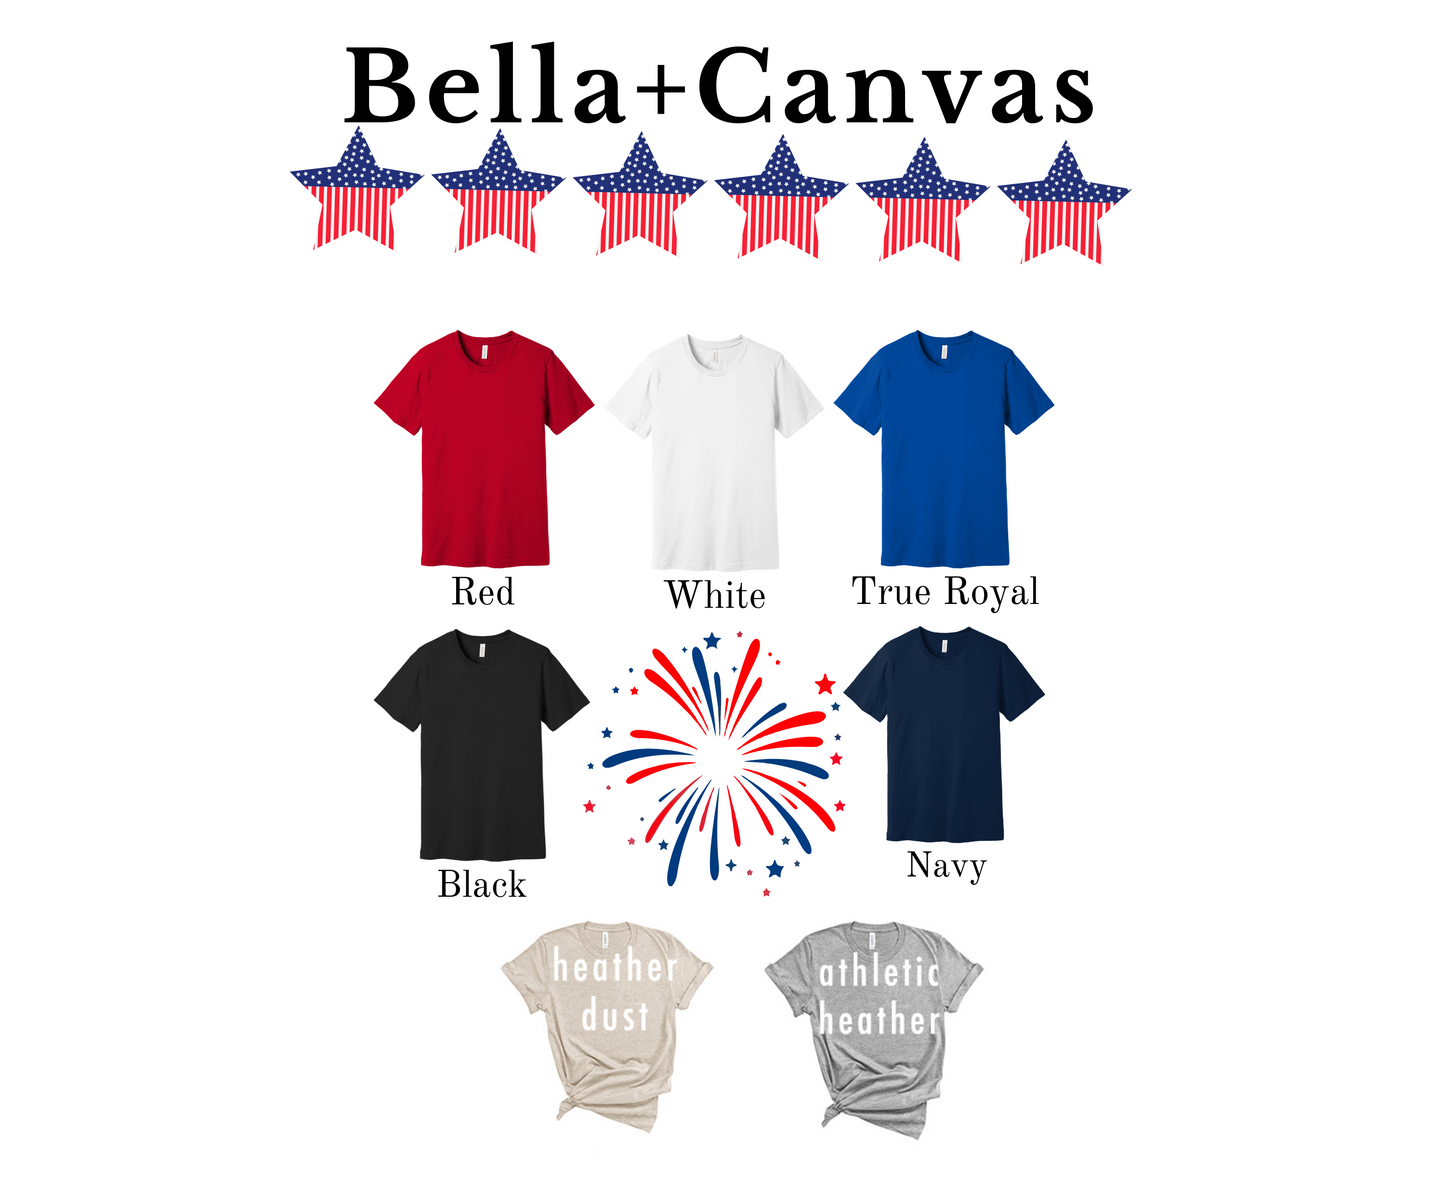 Home of the Brave Bella Canvas T-shirt